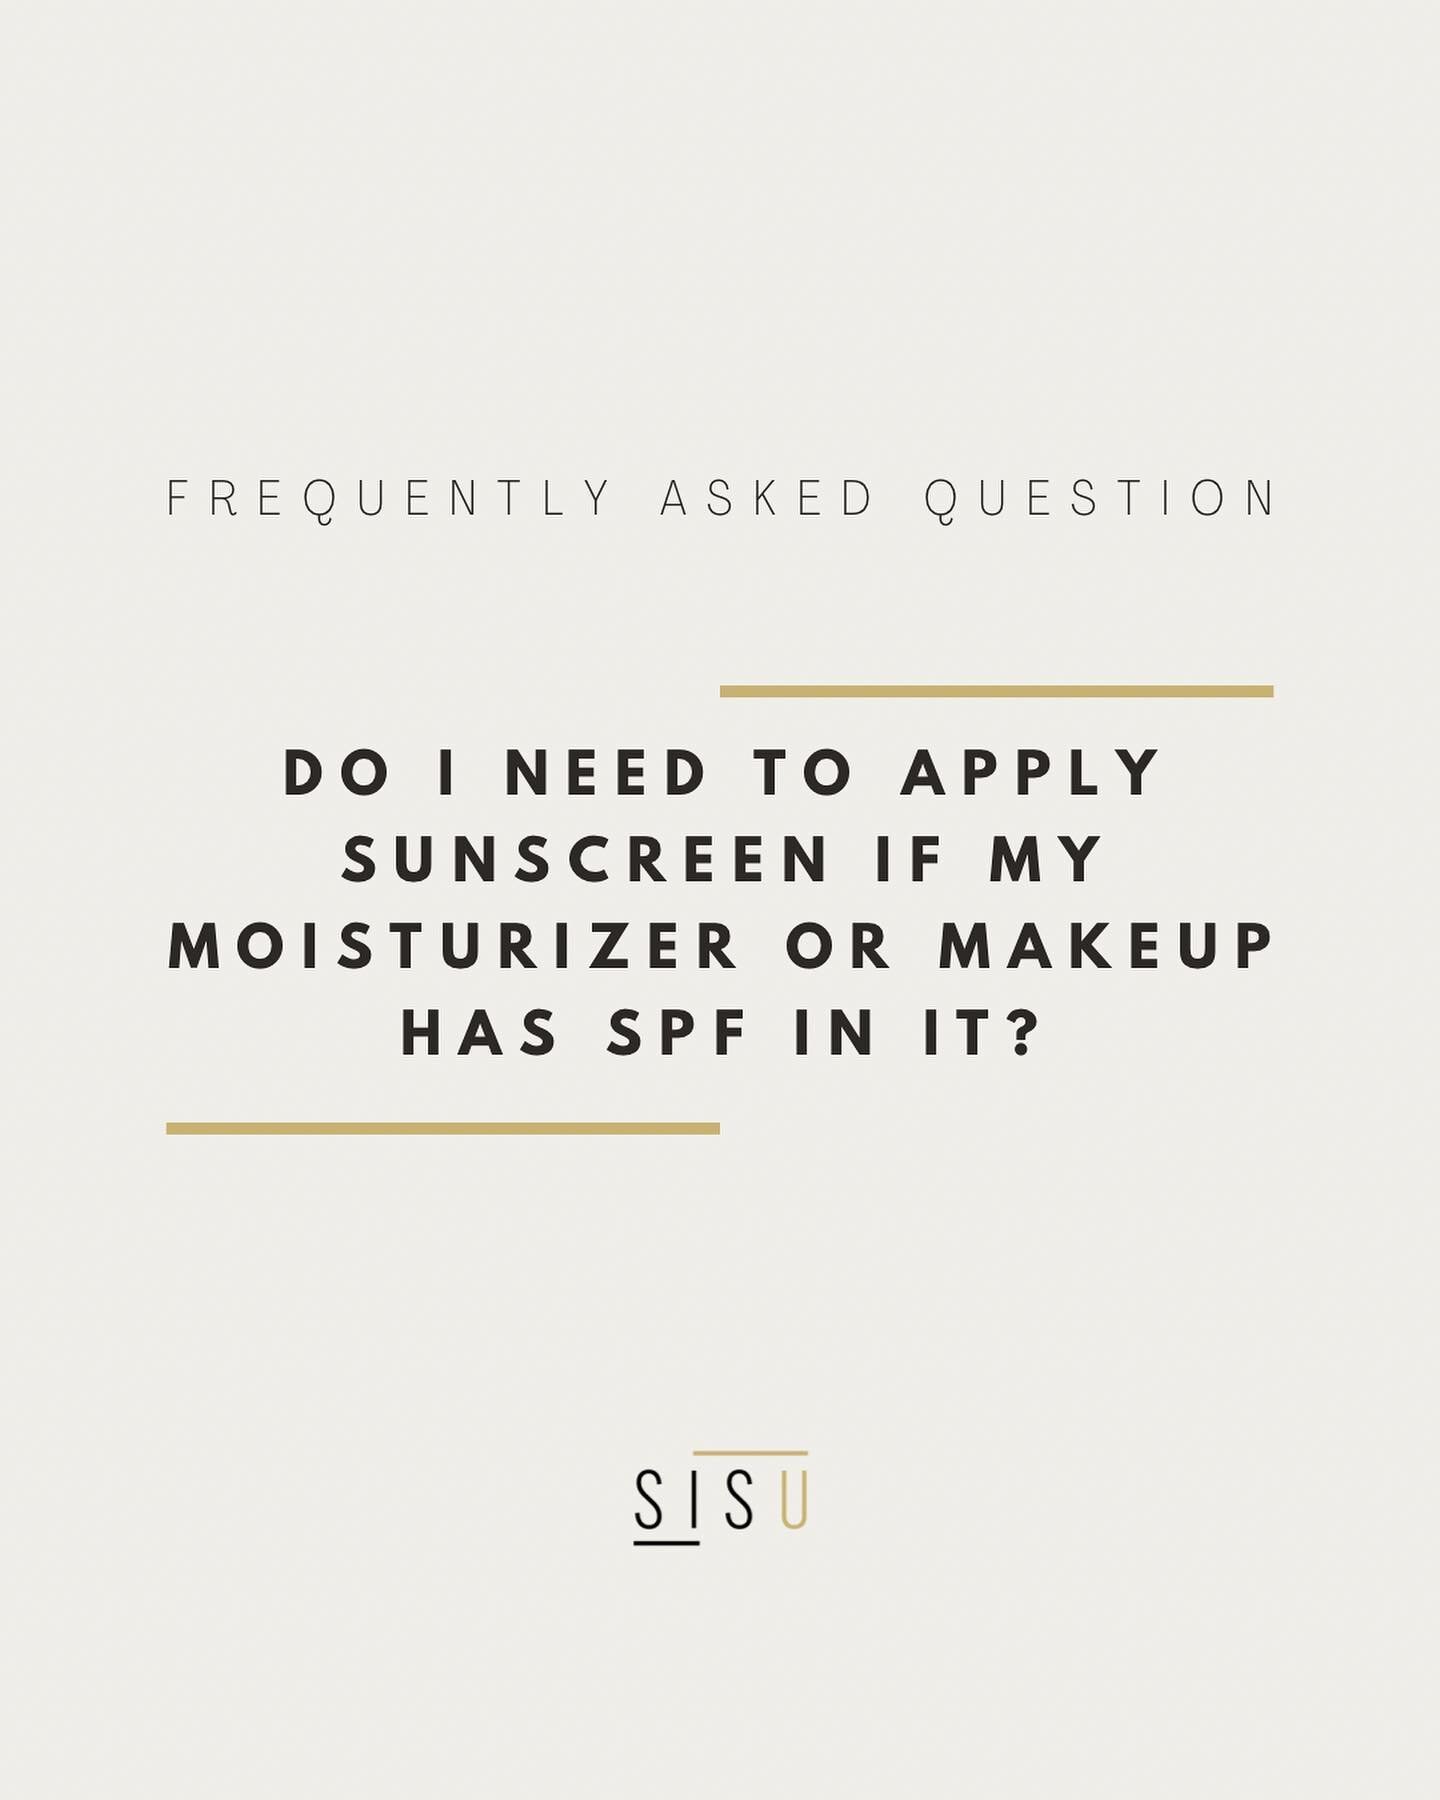 The truth is, I&rsquo;m extremely proud of my clients when they tell me they are using a moisturizer or makeup product that has SPF in it. It shows me that they are putting thought and effort into how they are care for their skin

That&rsquo;s why it